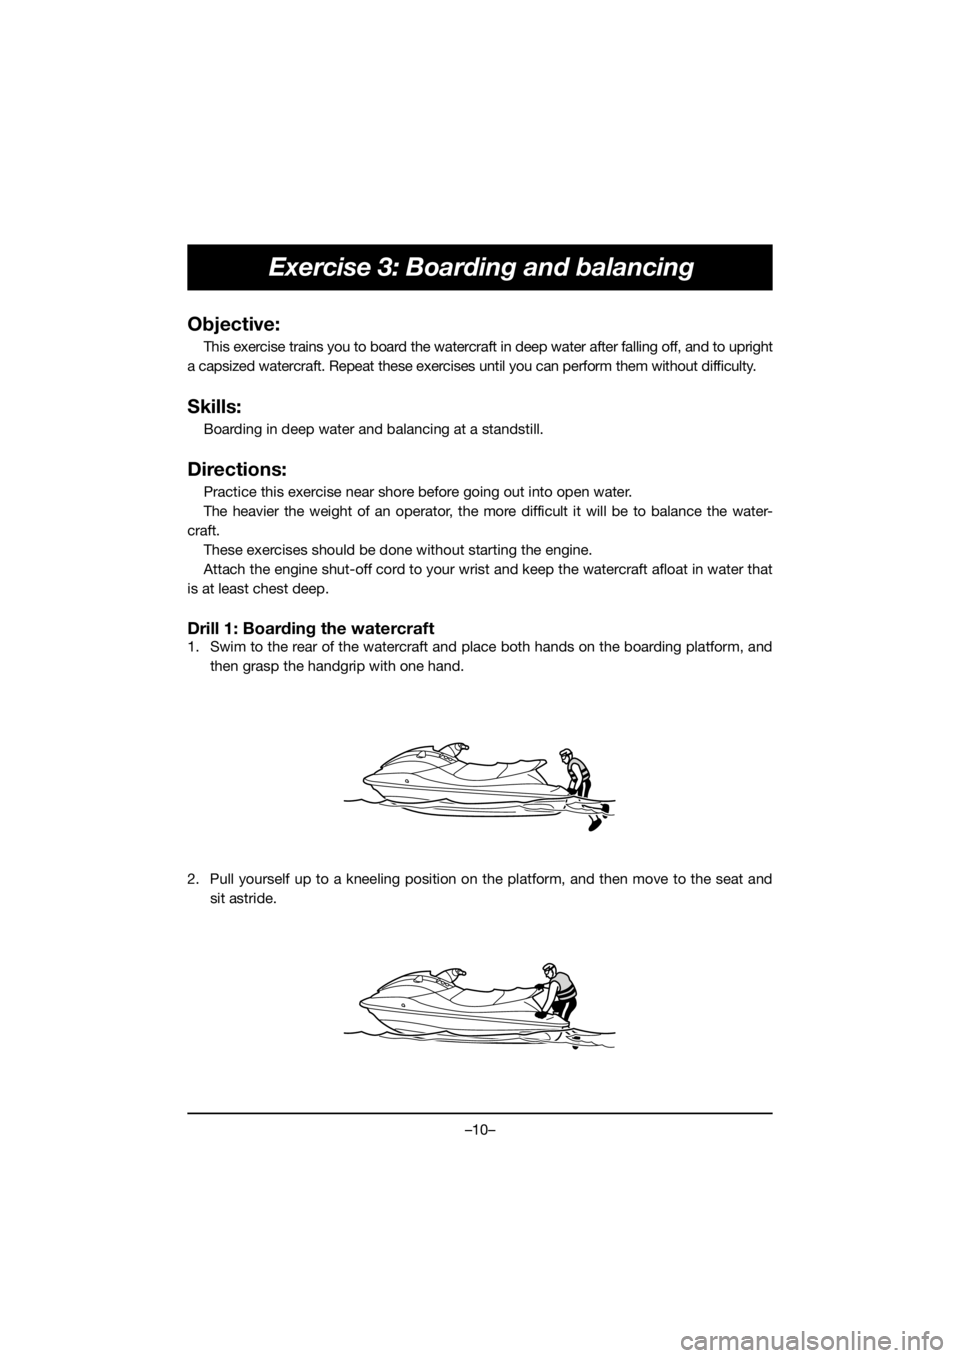 YAMAHA VX CRUISER HO 2020 User Guide –10–
Exercise 3: Boarding and balancing
Objective:
This exercise trains you to board the watercraft in deep water after falling off, and to upright
a capsized watercraft. Repeat these exercises un